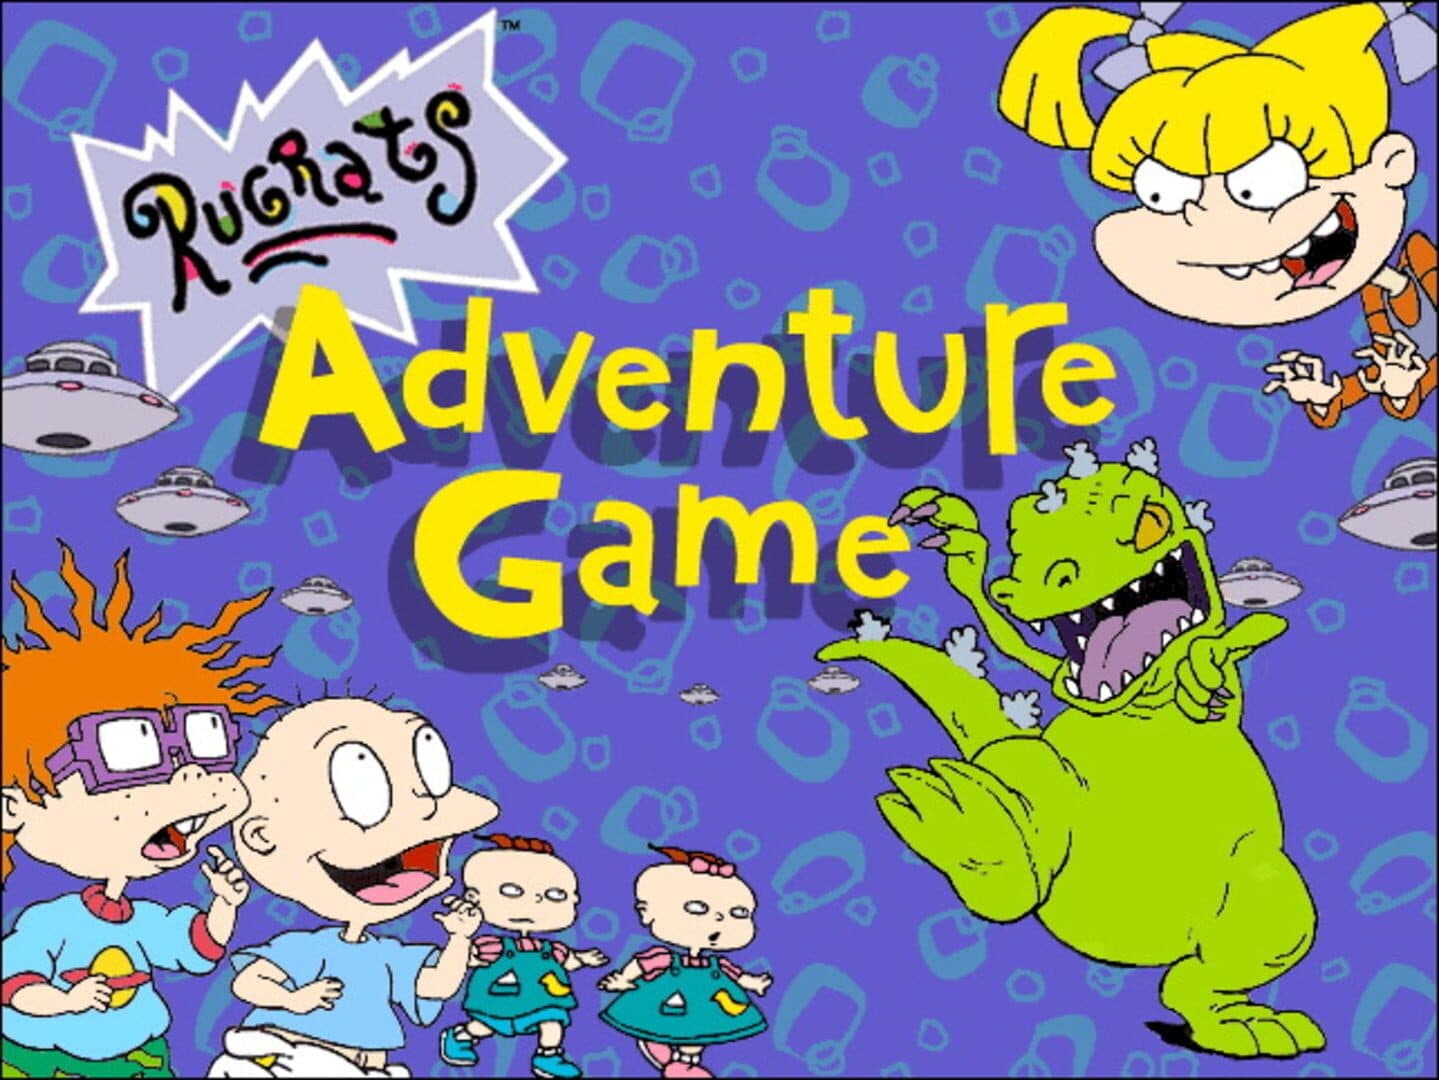 Rugrats Adventure Game Image